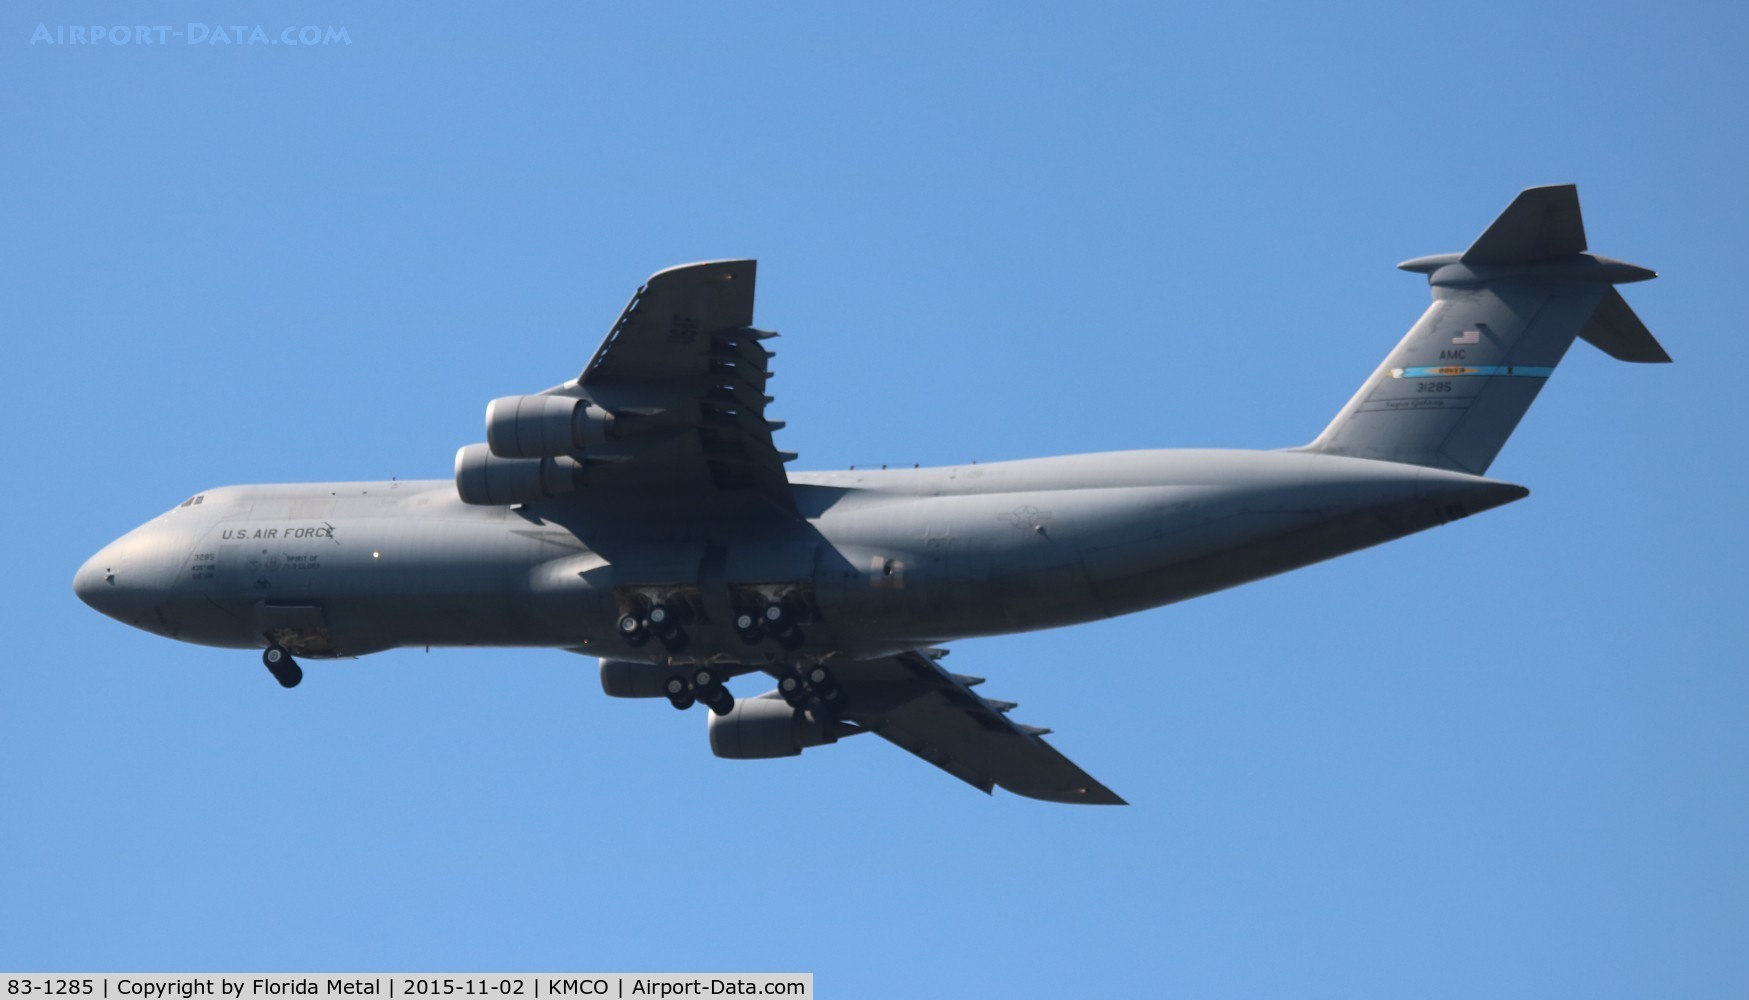 83-1285, 1983 Lockheed C-5M Super Galaxy C/N 500-0082, Airlift and Tanker 2015